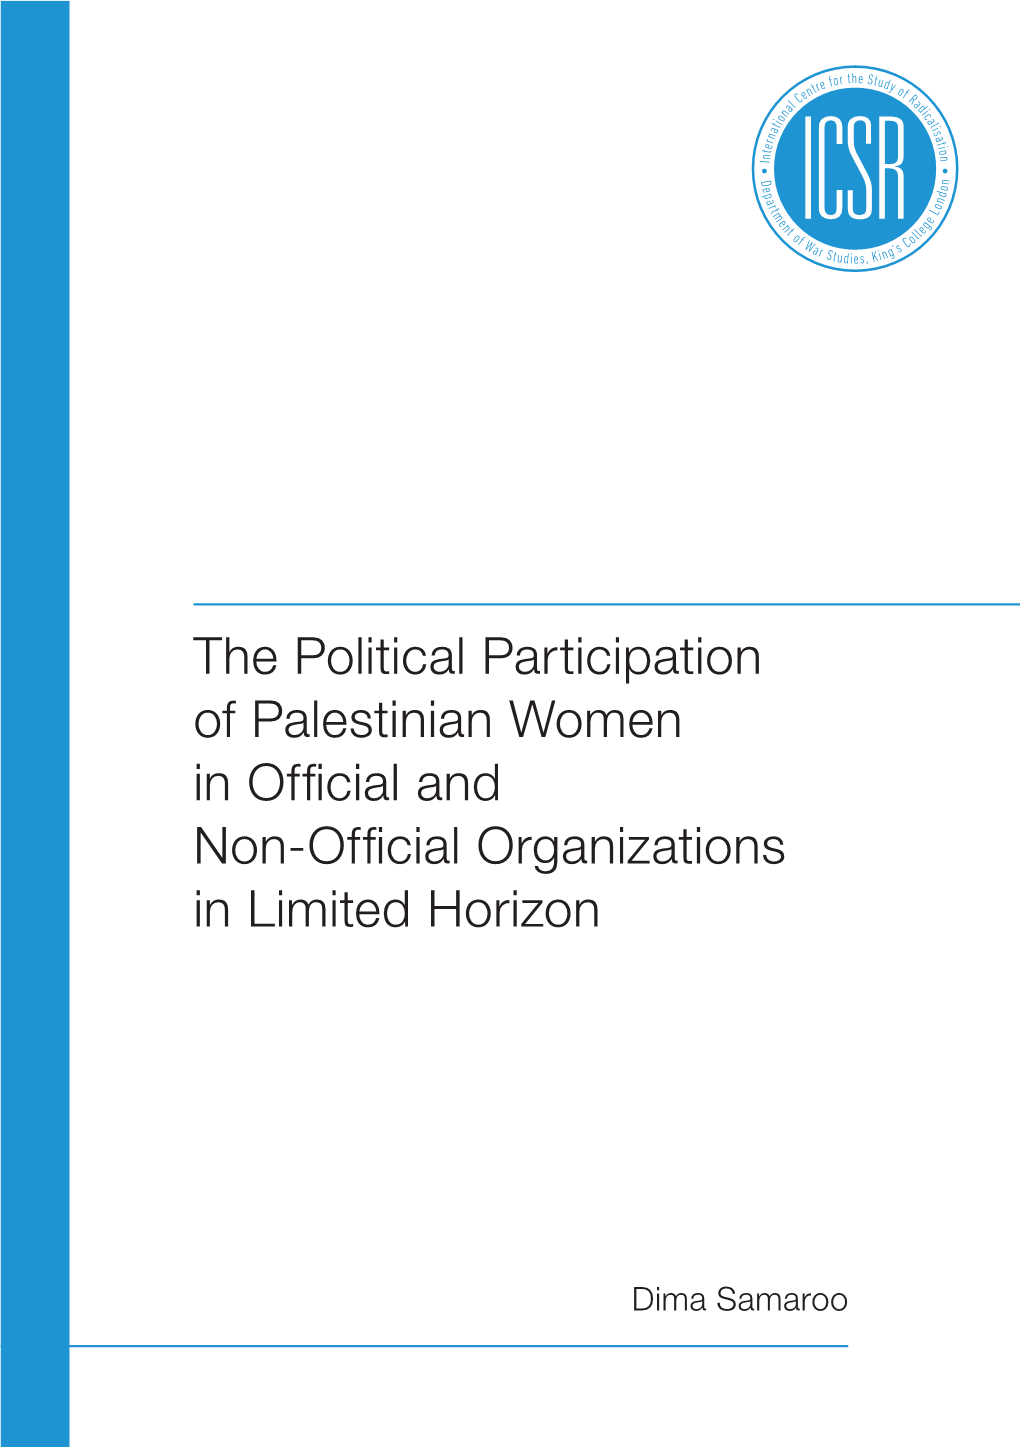 The Political Participation of Palestinian Women in Official and Non-Official Organizations in Limited Horizon